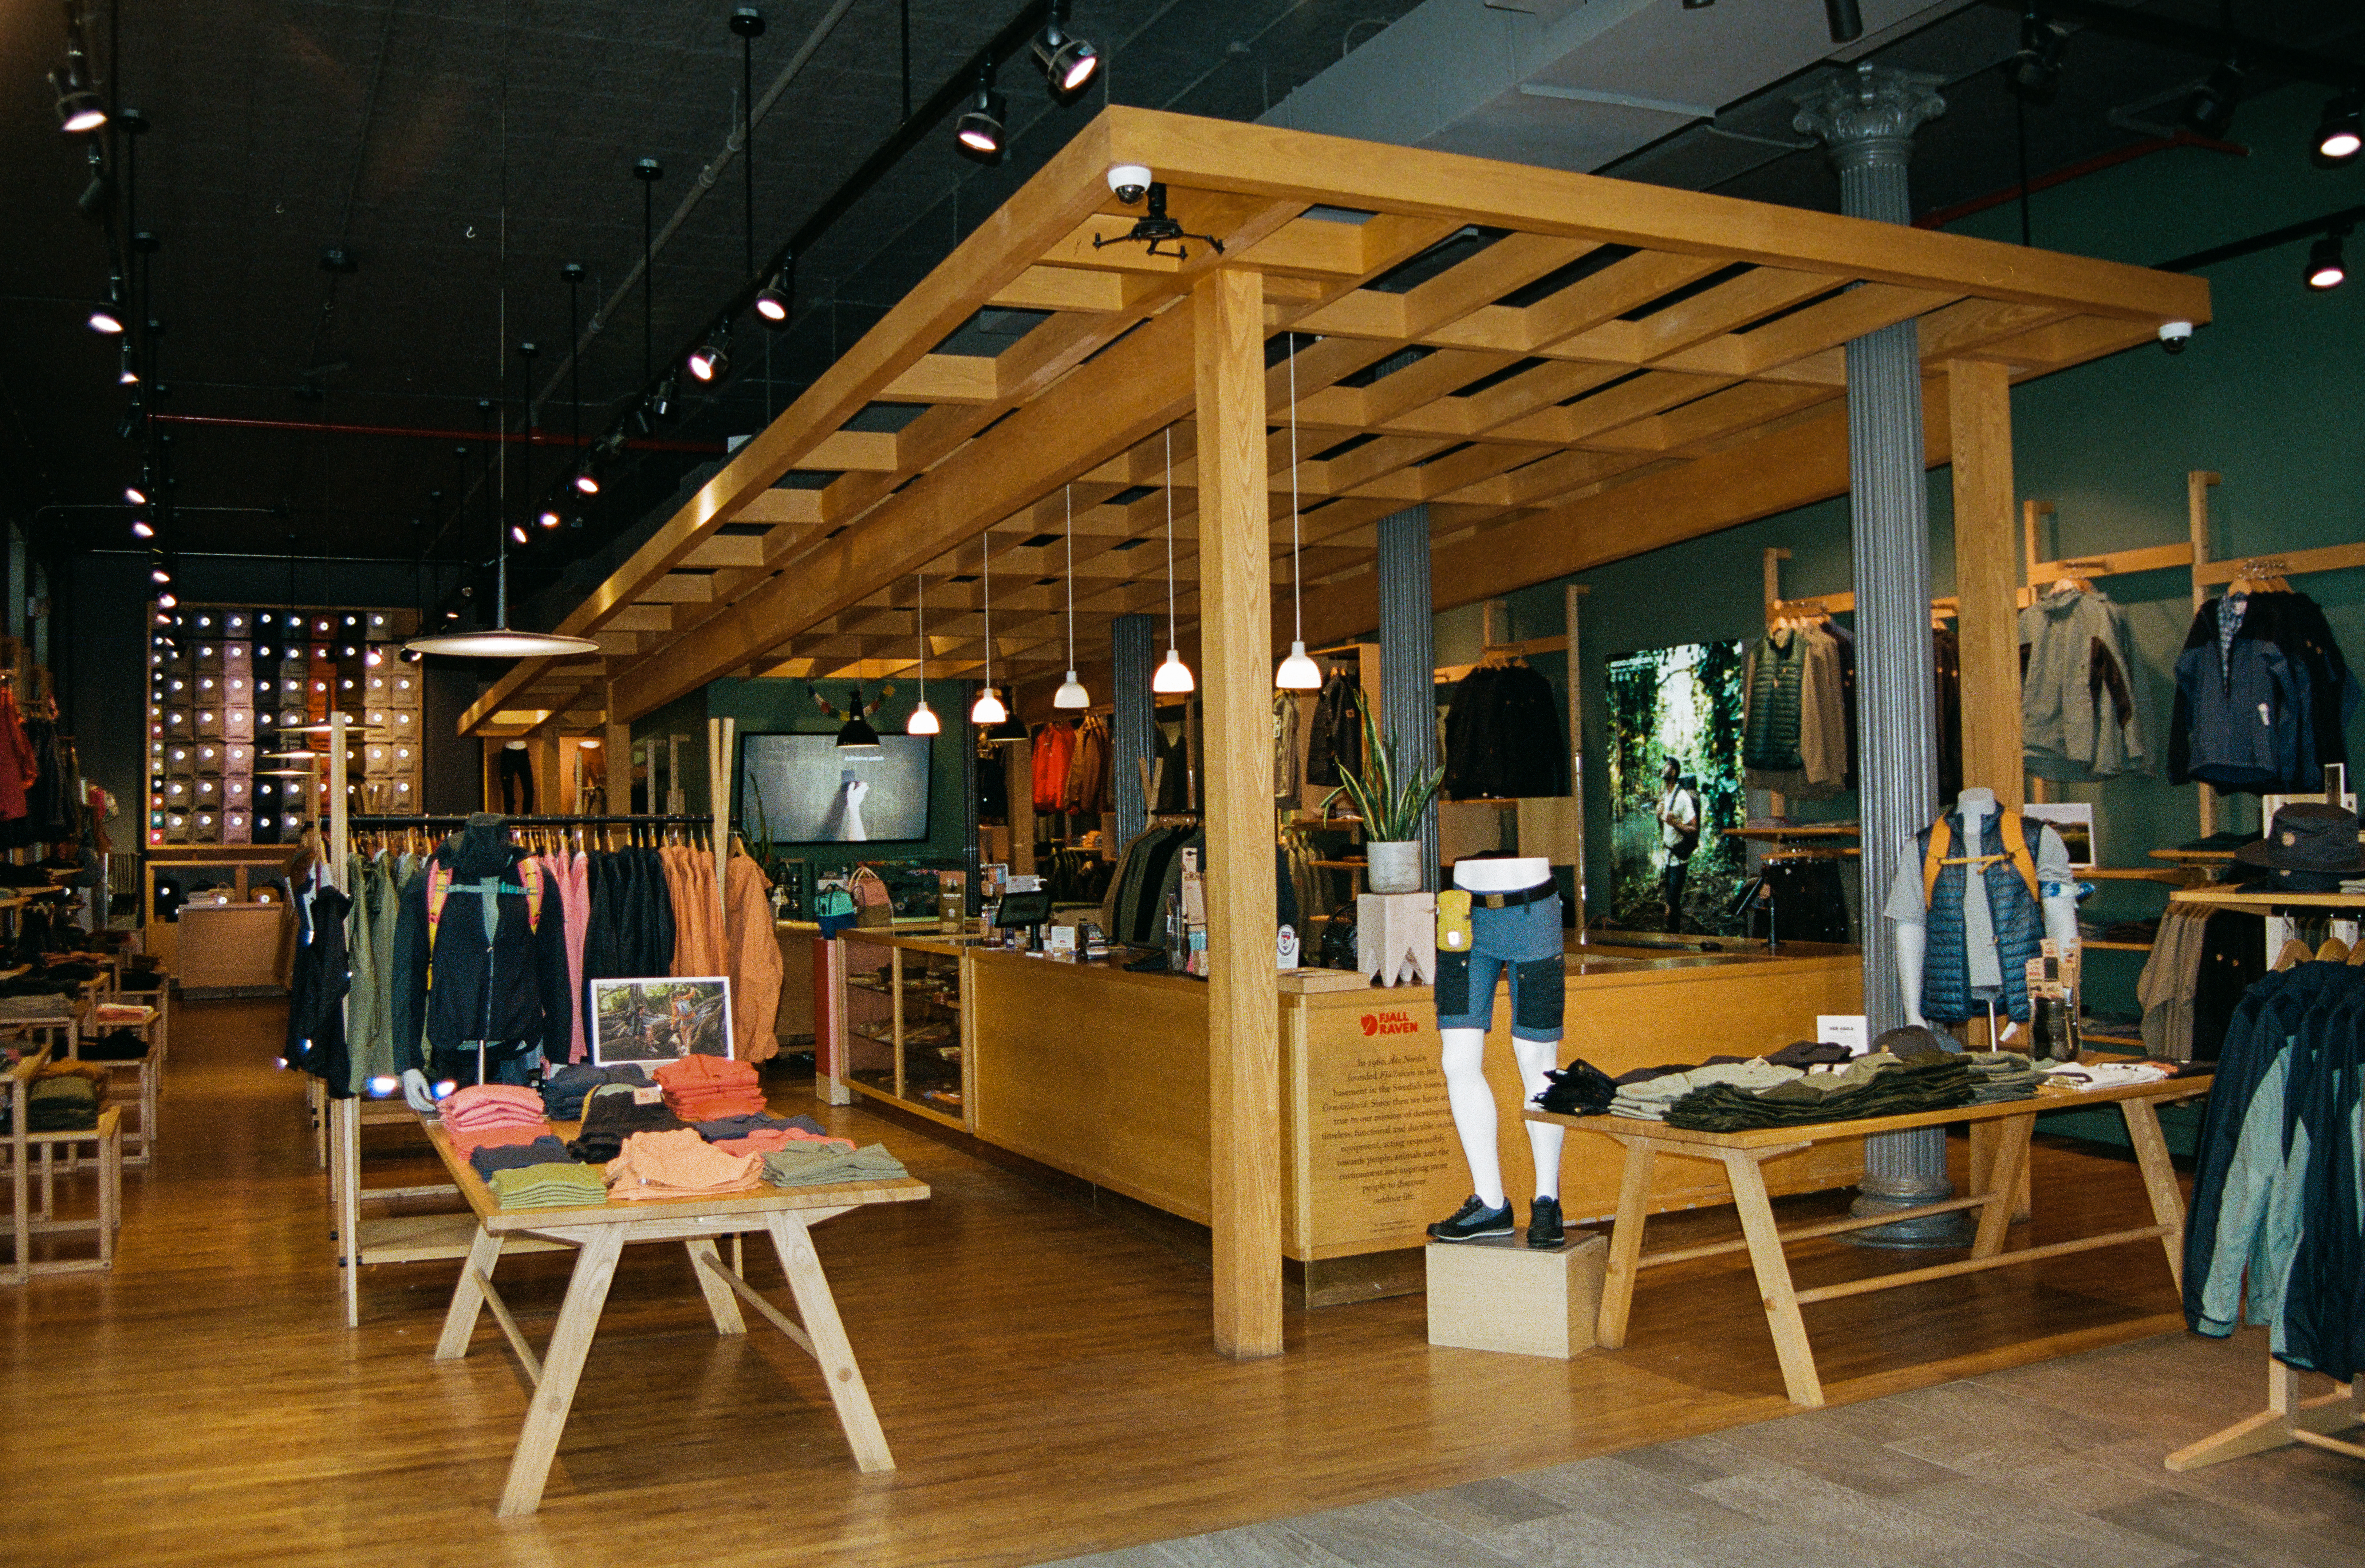 Fjallraven retailer in Ny, New York Store pic 2